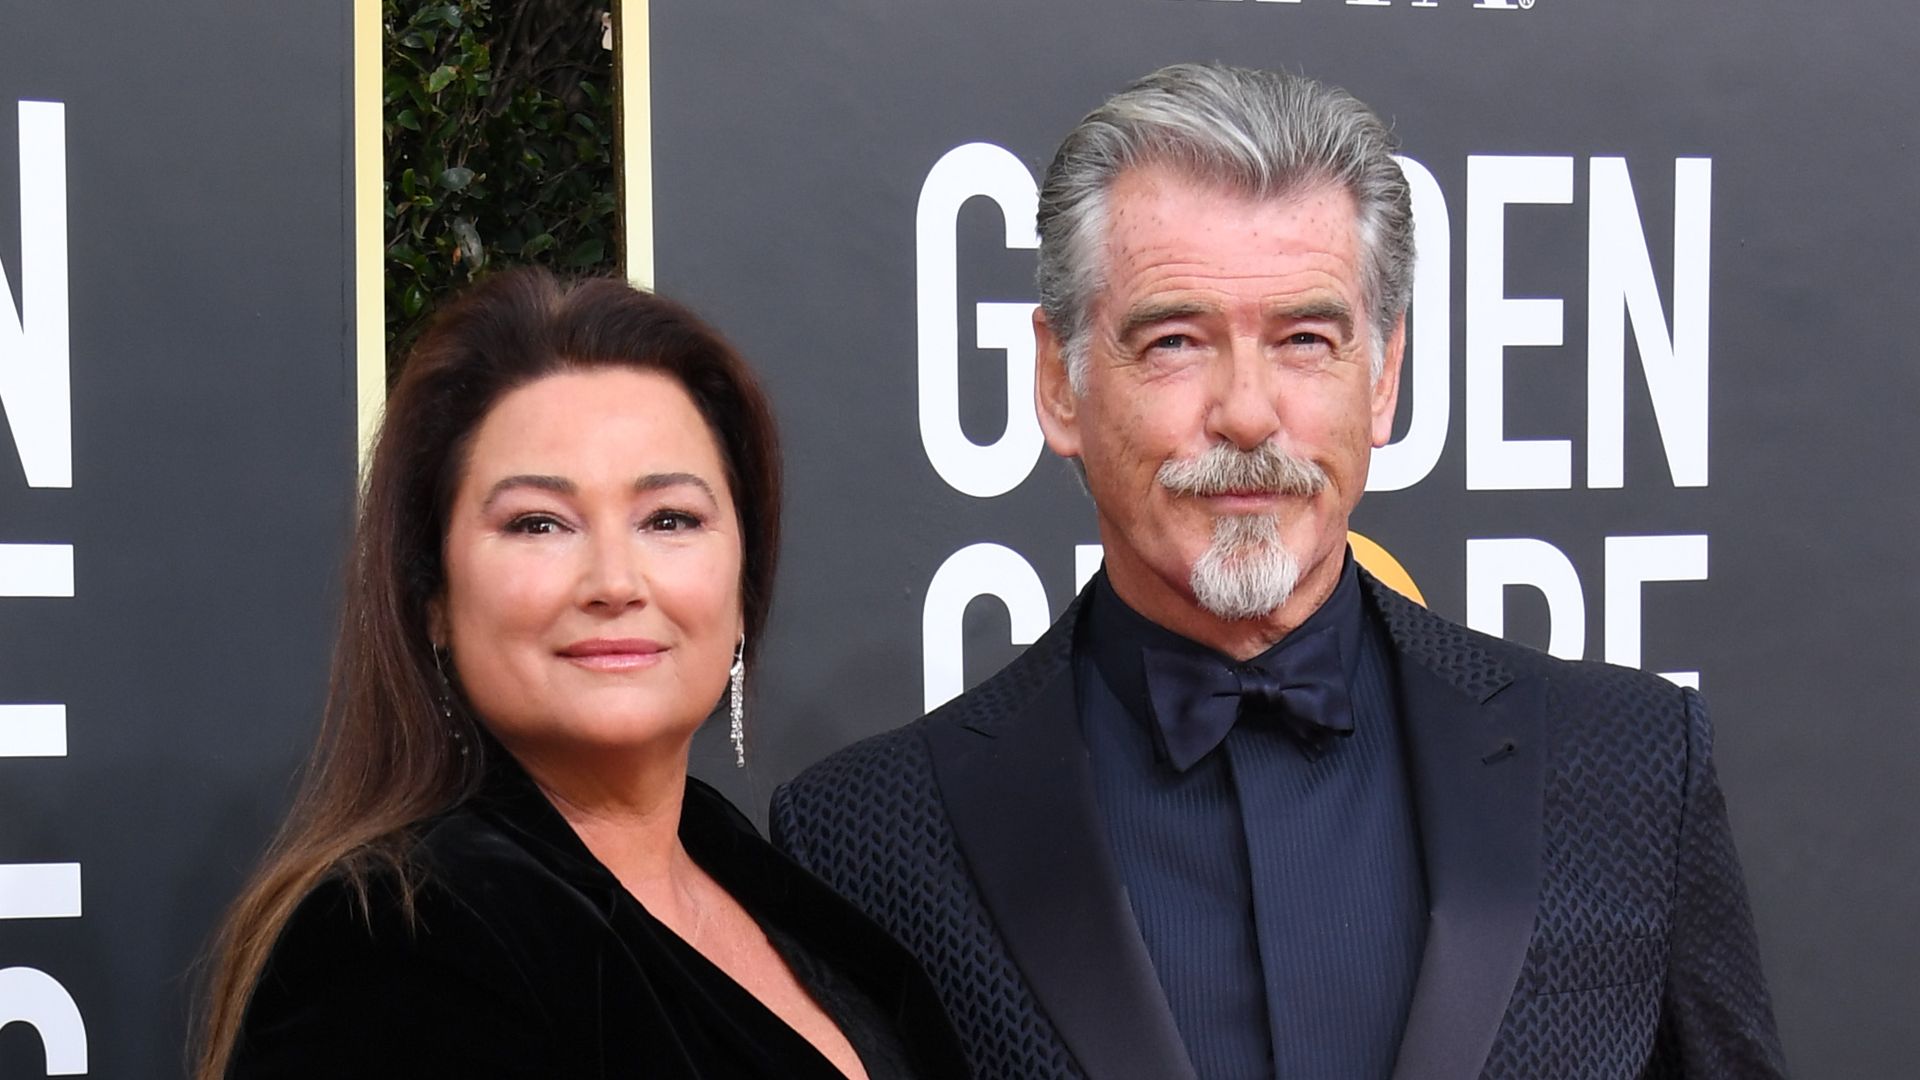 Pierce Brosnan and wife Keely Shaye Brosnan on the Golden Globes red carpet